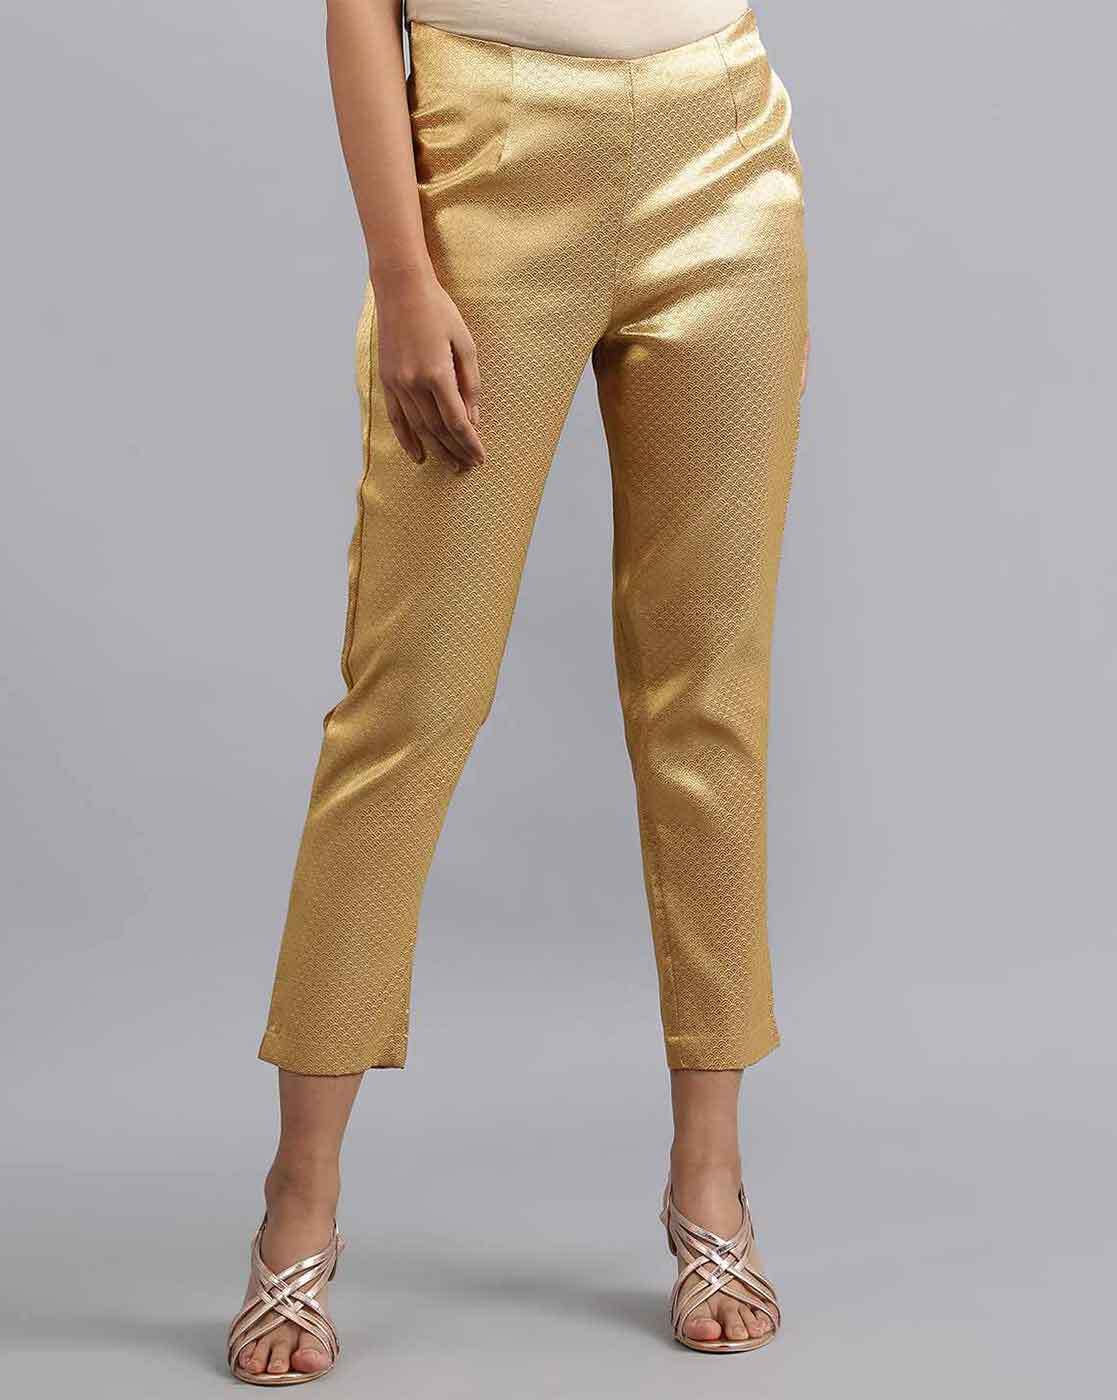 gold leather trousers